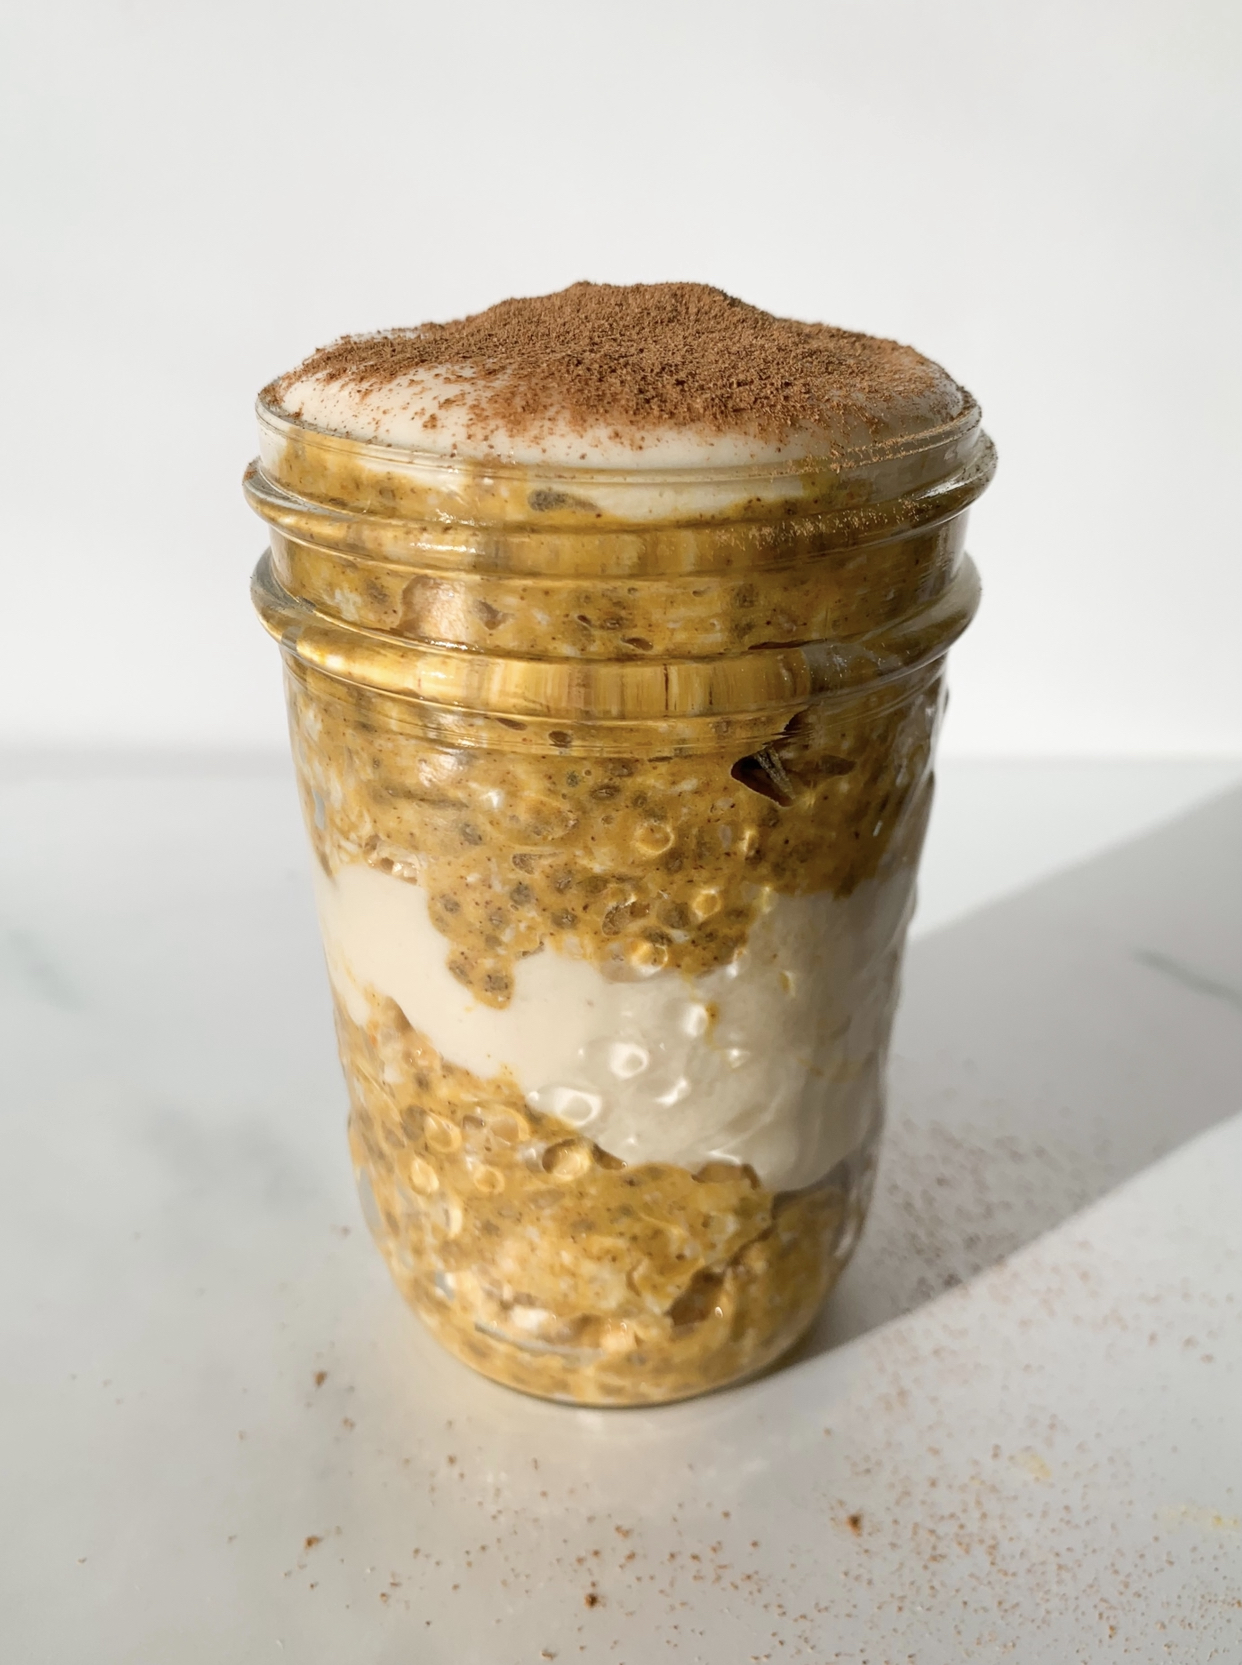 Pumpkin Pie Overnight Oats with Chia